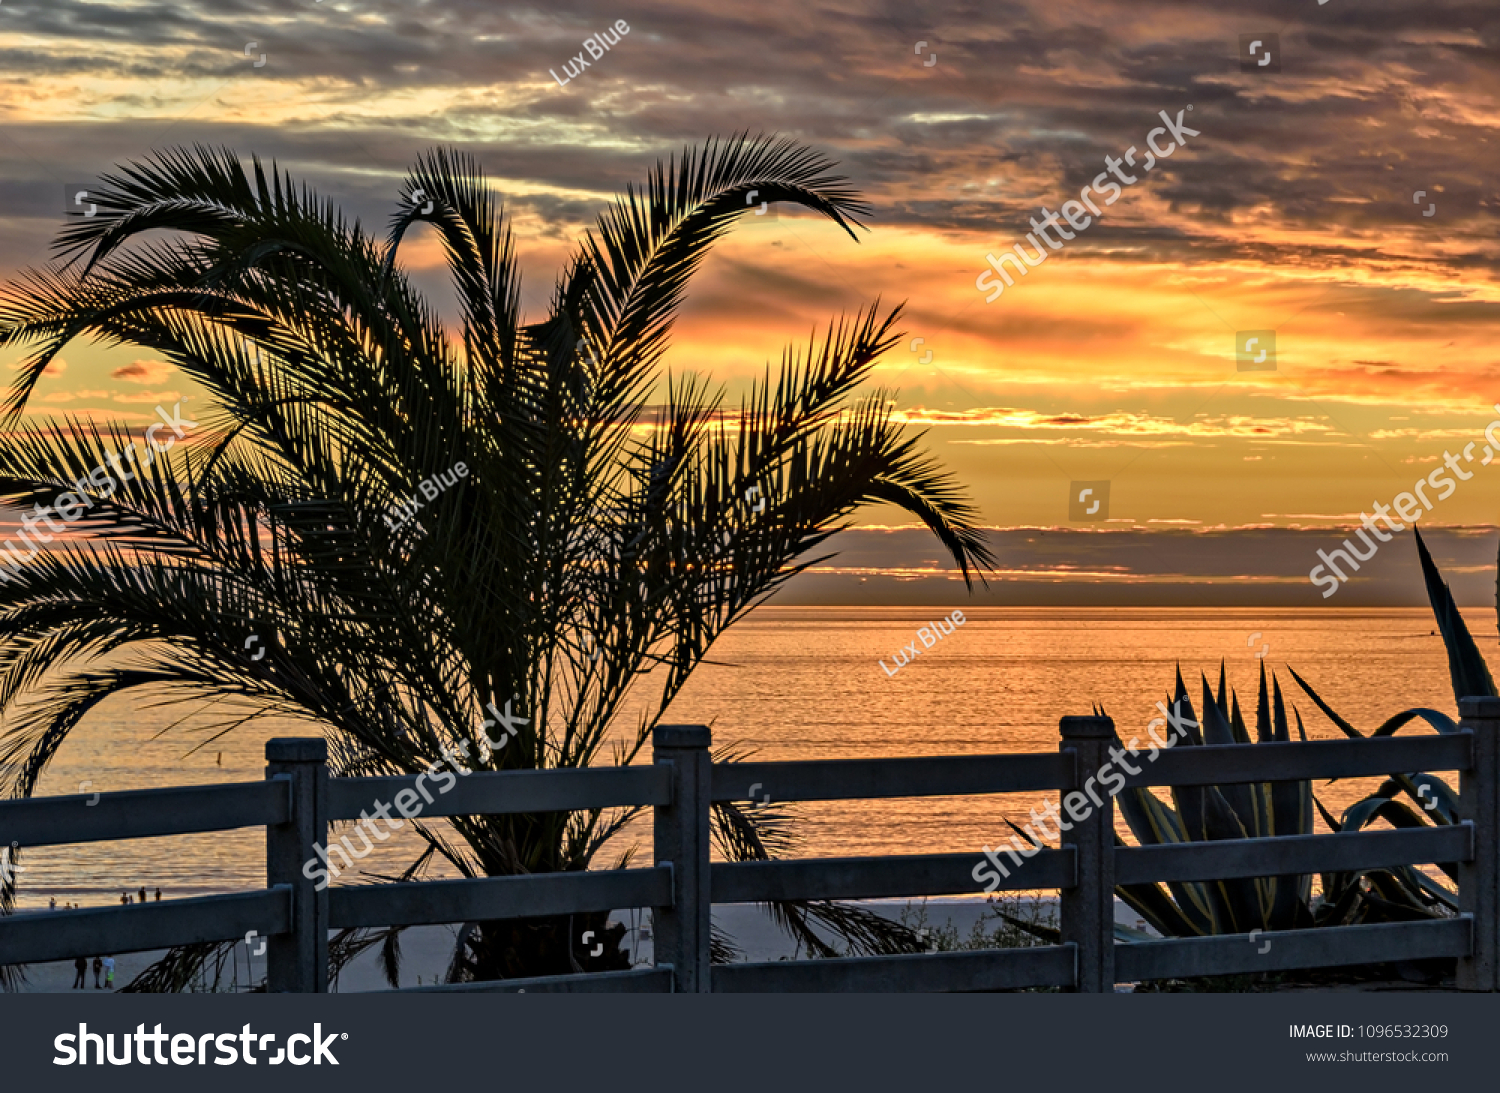 Beautiful ocean sunset with palm tree silhouette as seen from Palisades Park in Santa Monica, California. #1096532309